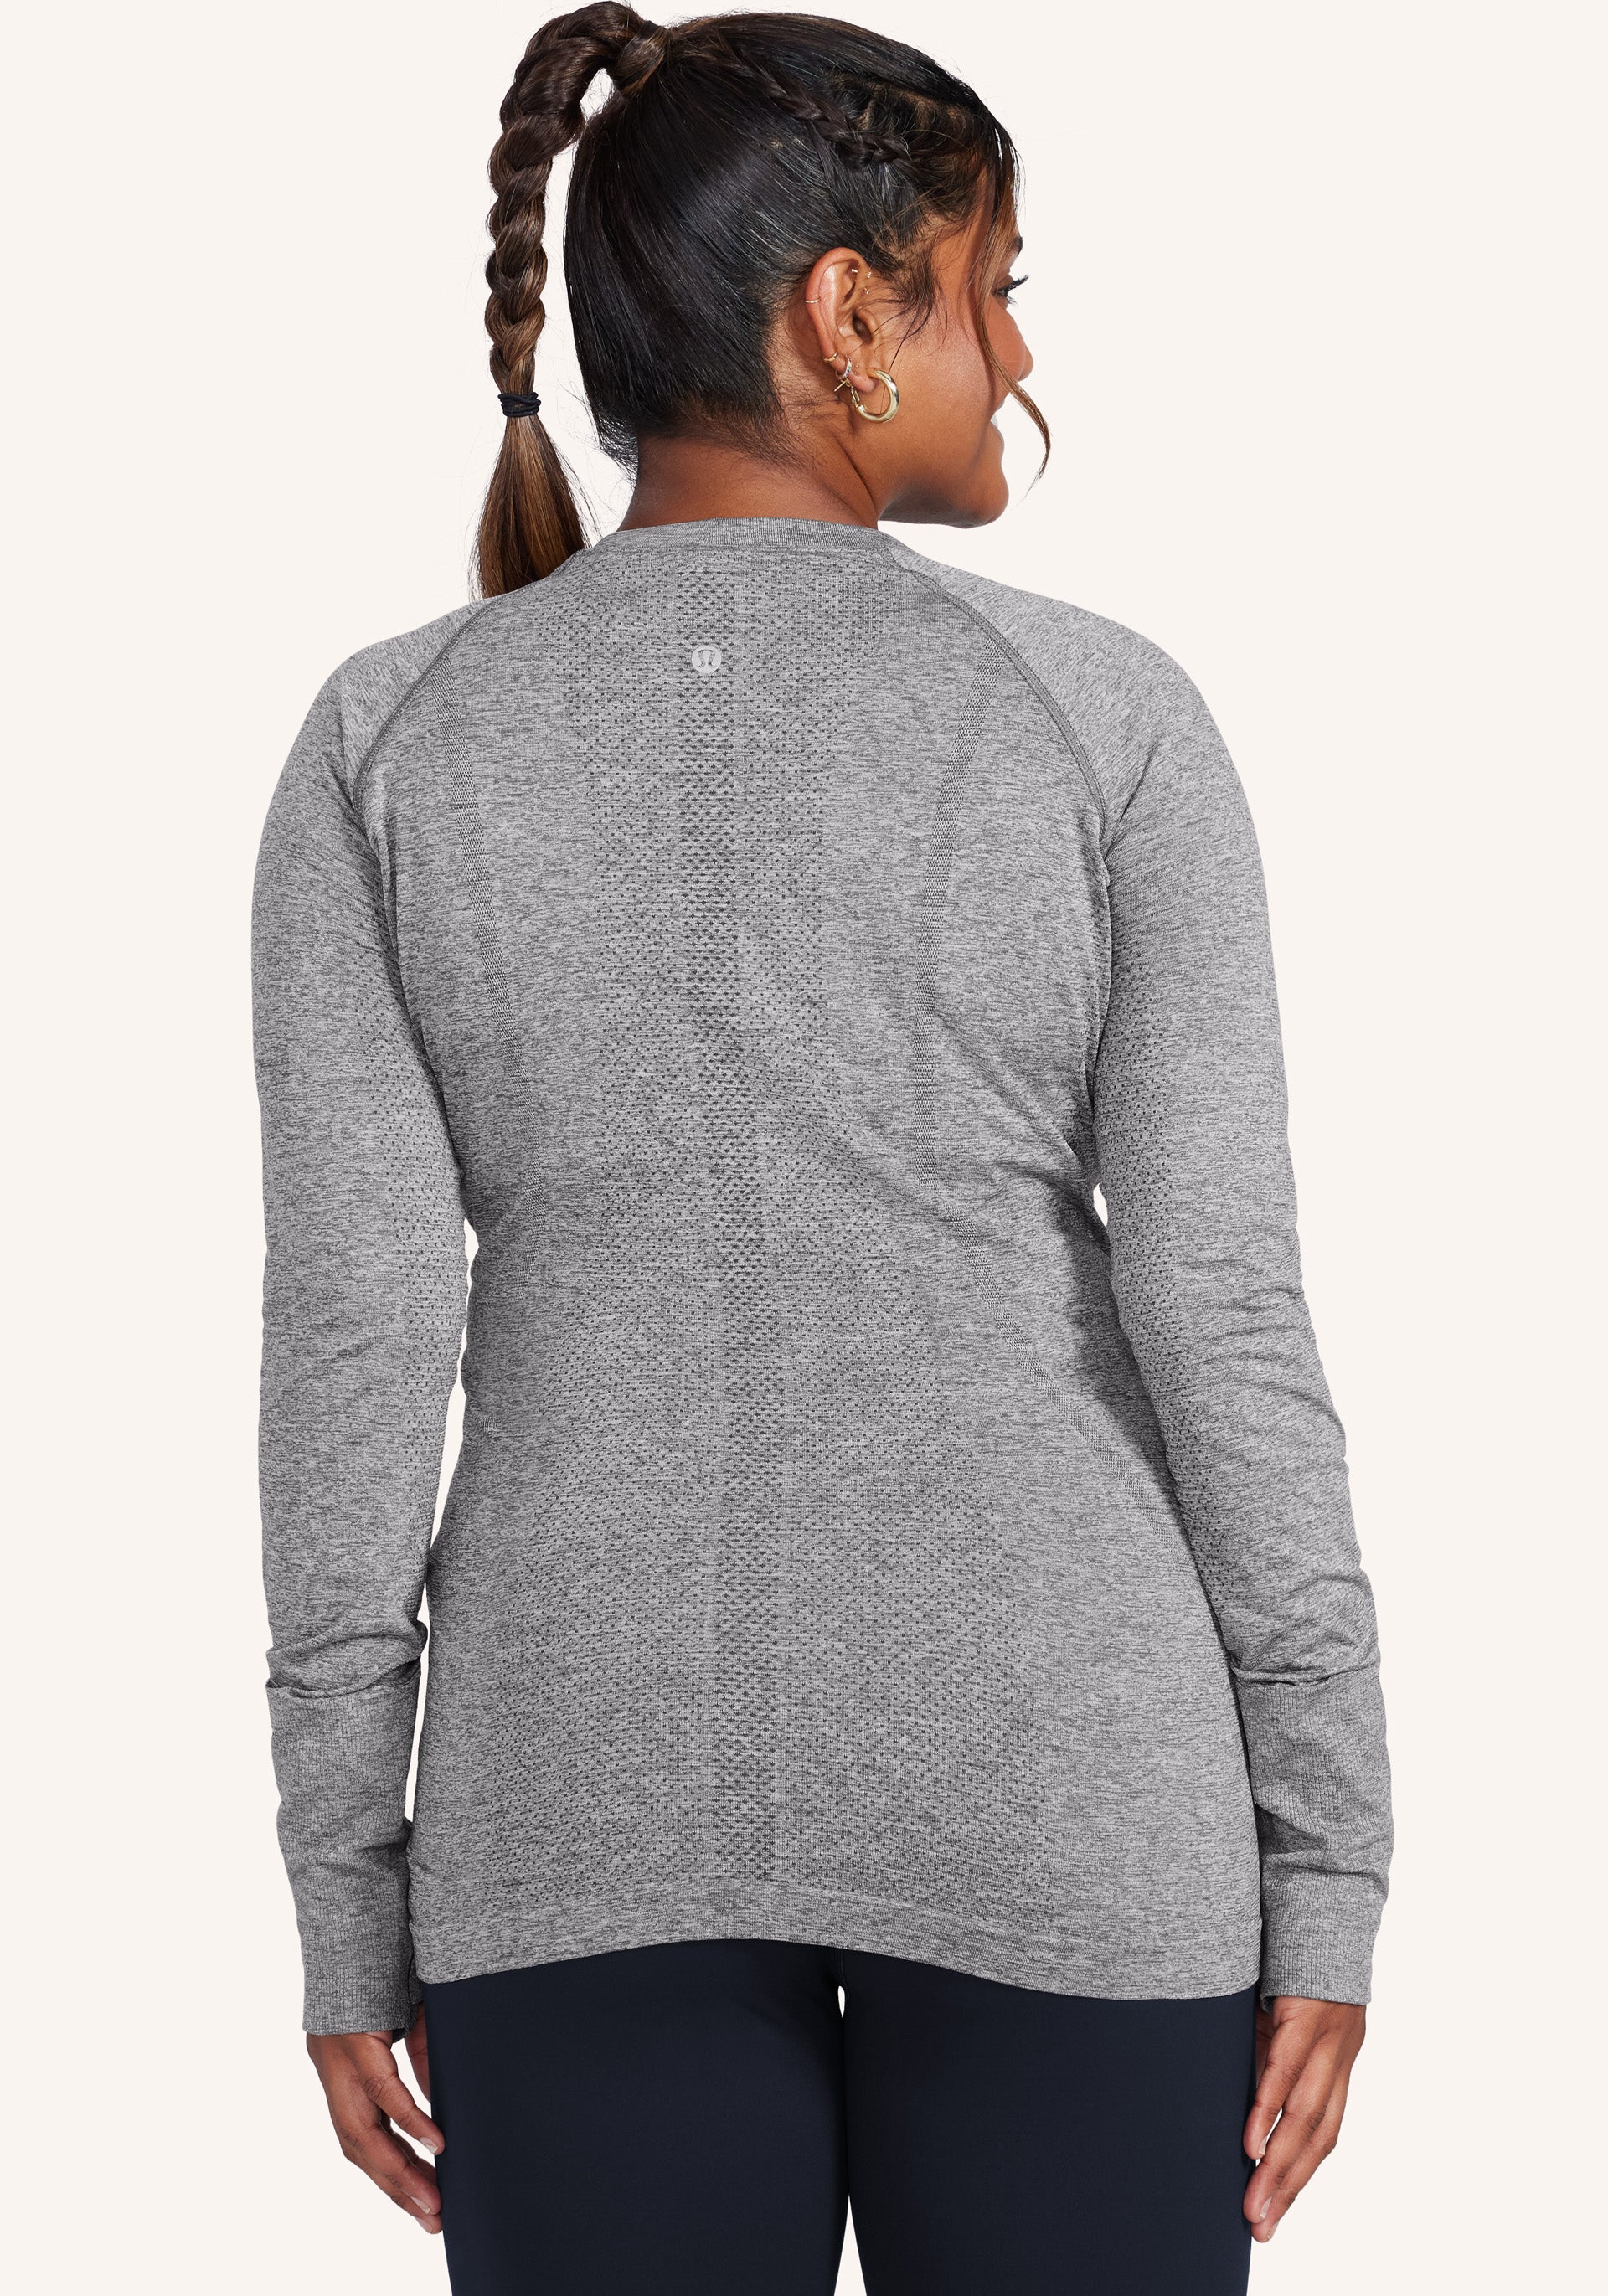 lululemon athletica Swiftly Relaxed Long Sleeve Shirt in Red